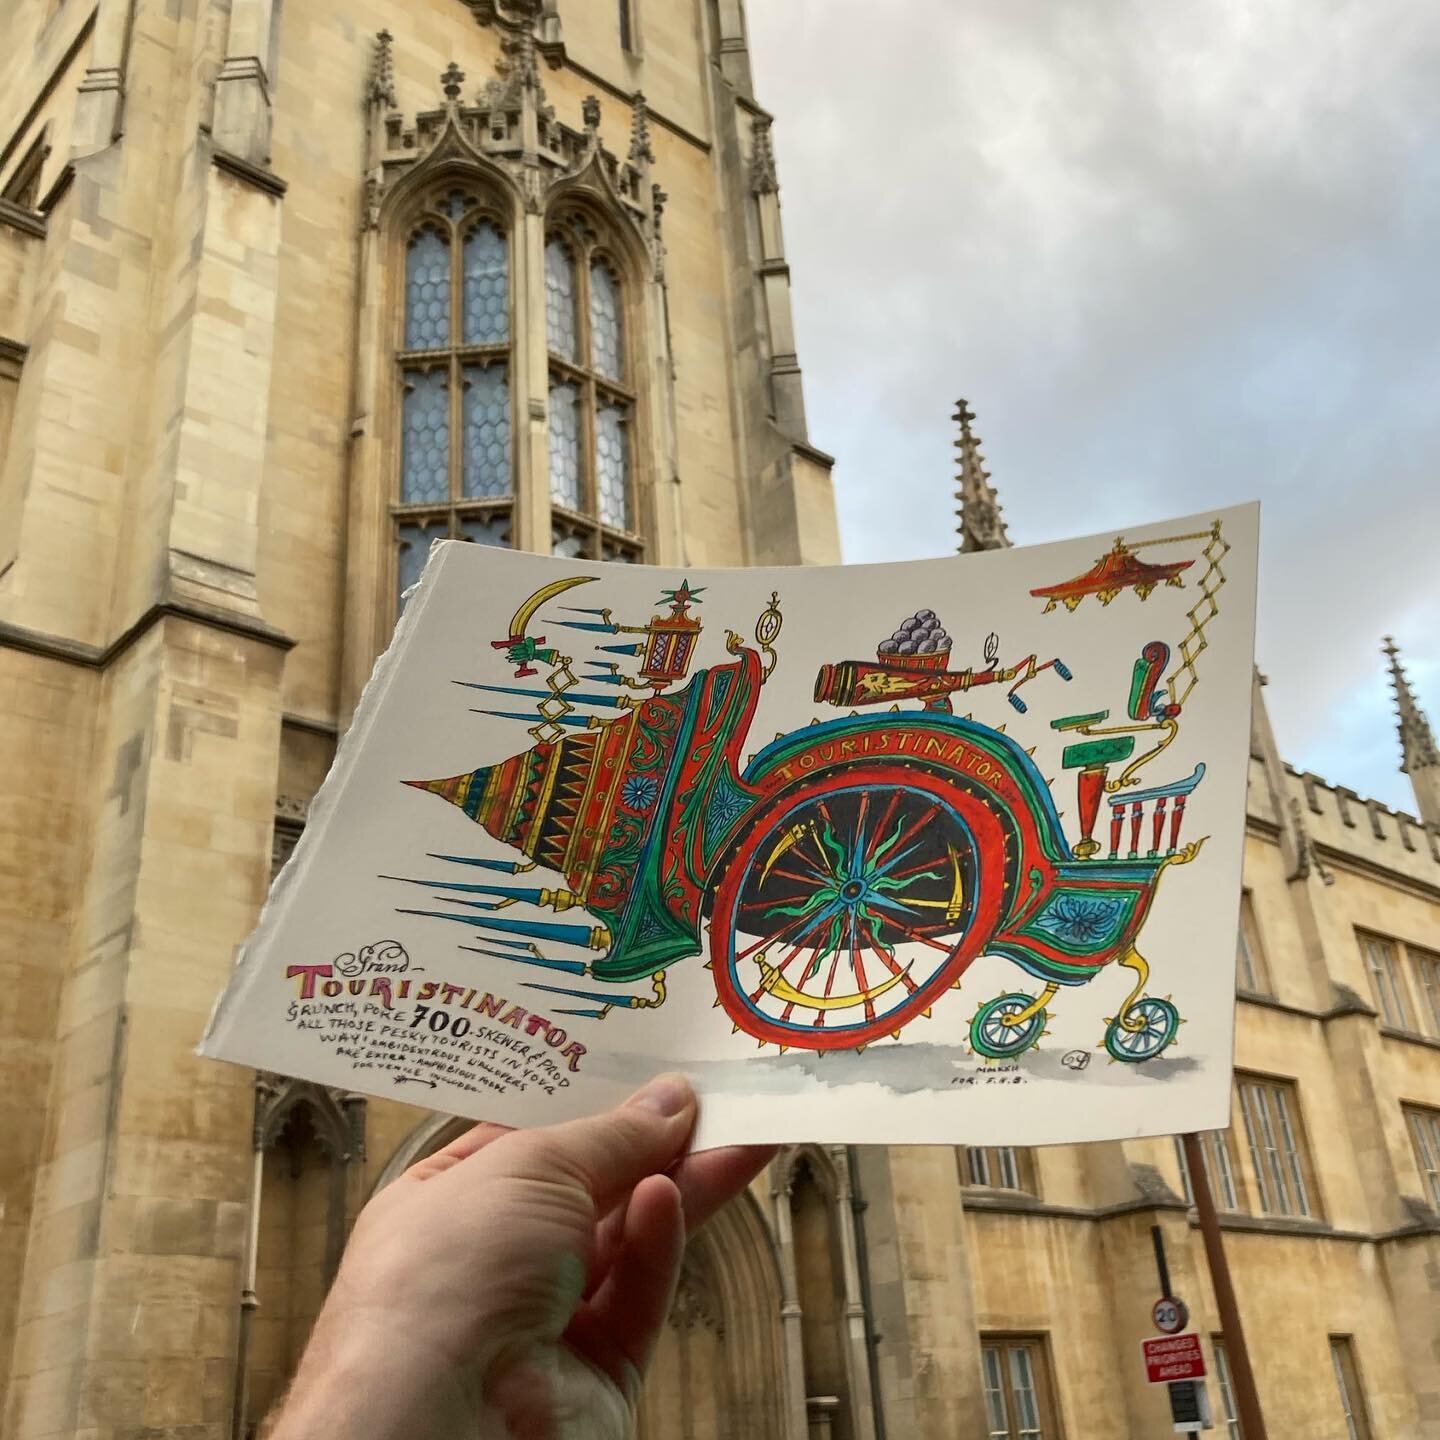 Moments before the touristinator was posted off to its new home. #drawing #nonsense #illustration #whimwondery #tourists #cambridge